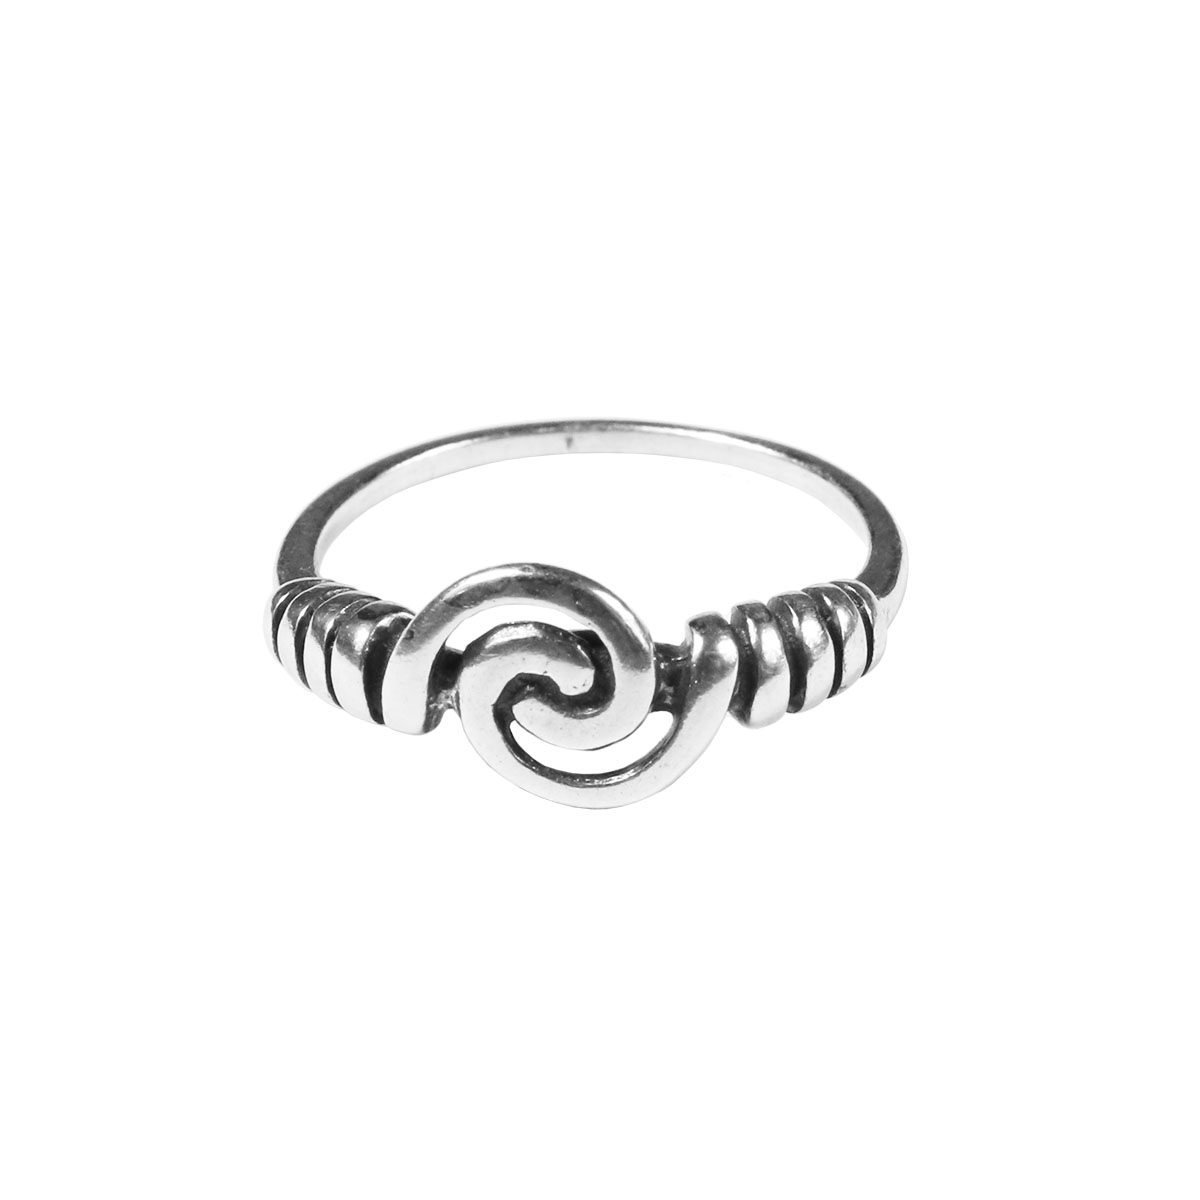 Buy Silver Swirl Ring, String Ring, Solid Silver Ring, Infinity Ring, Spiral  Ring, Unique Silver Ring, Sterling Silver Ring, Large Round Ring Online in  India - Etsy